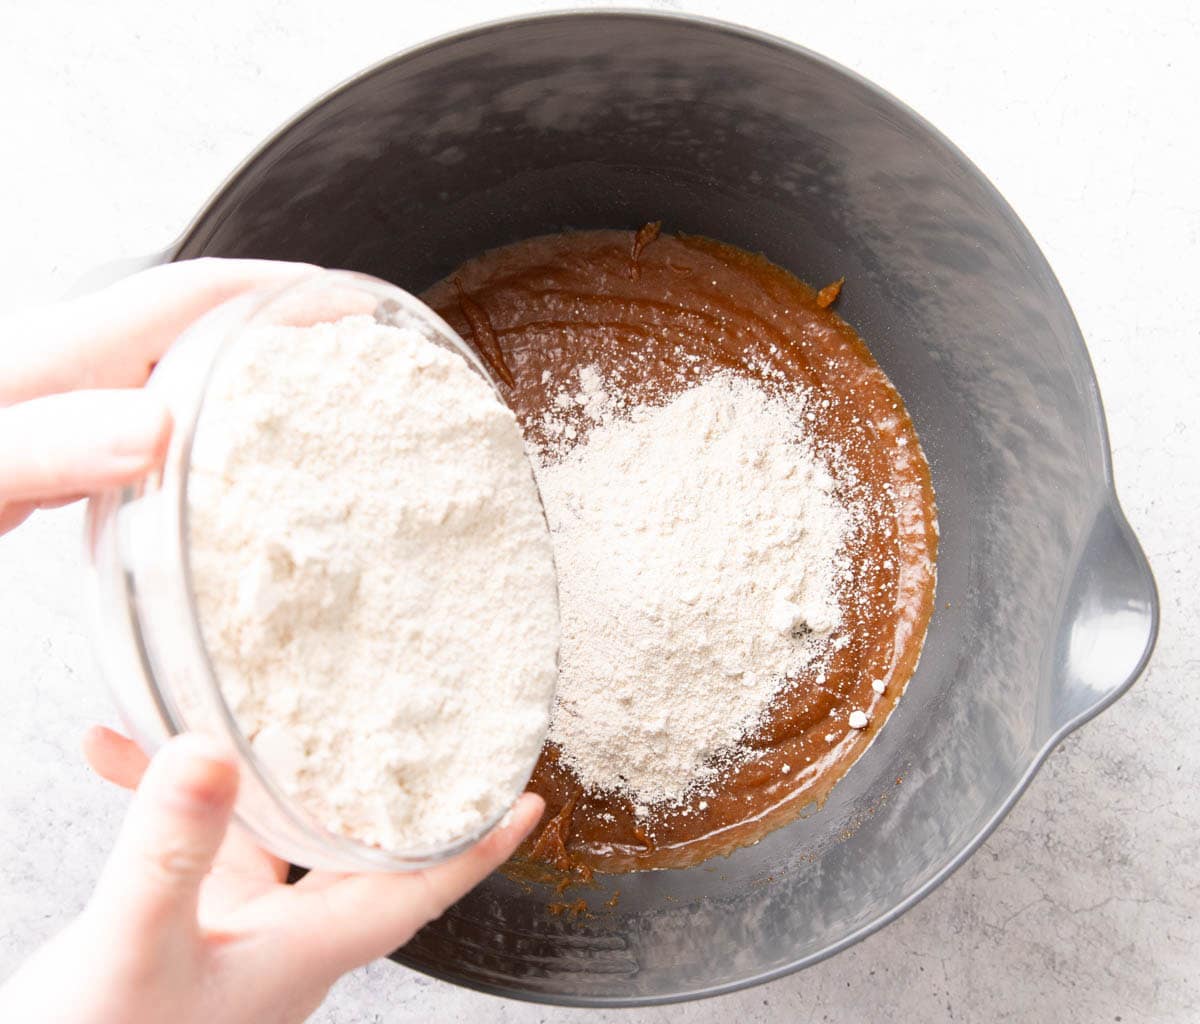 Two photos showing How to Make Vegan Gluten Free Pumpkin Bread – pouring flour over wet ingredients